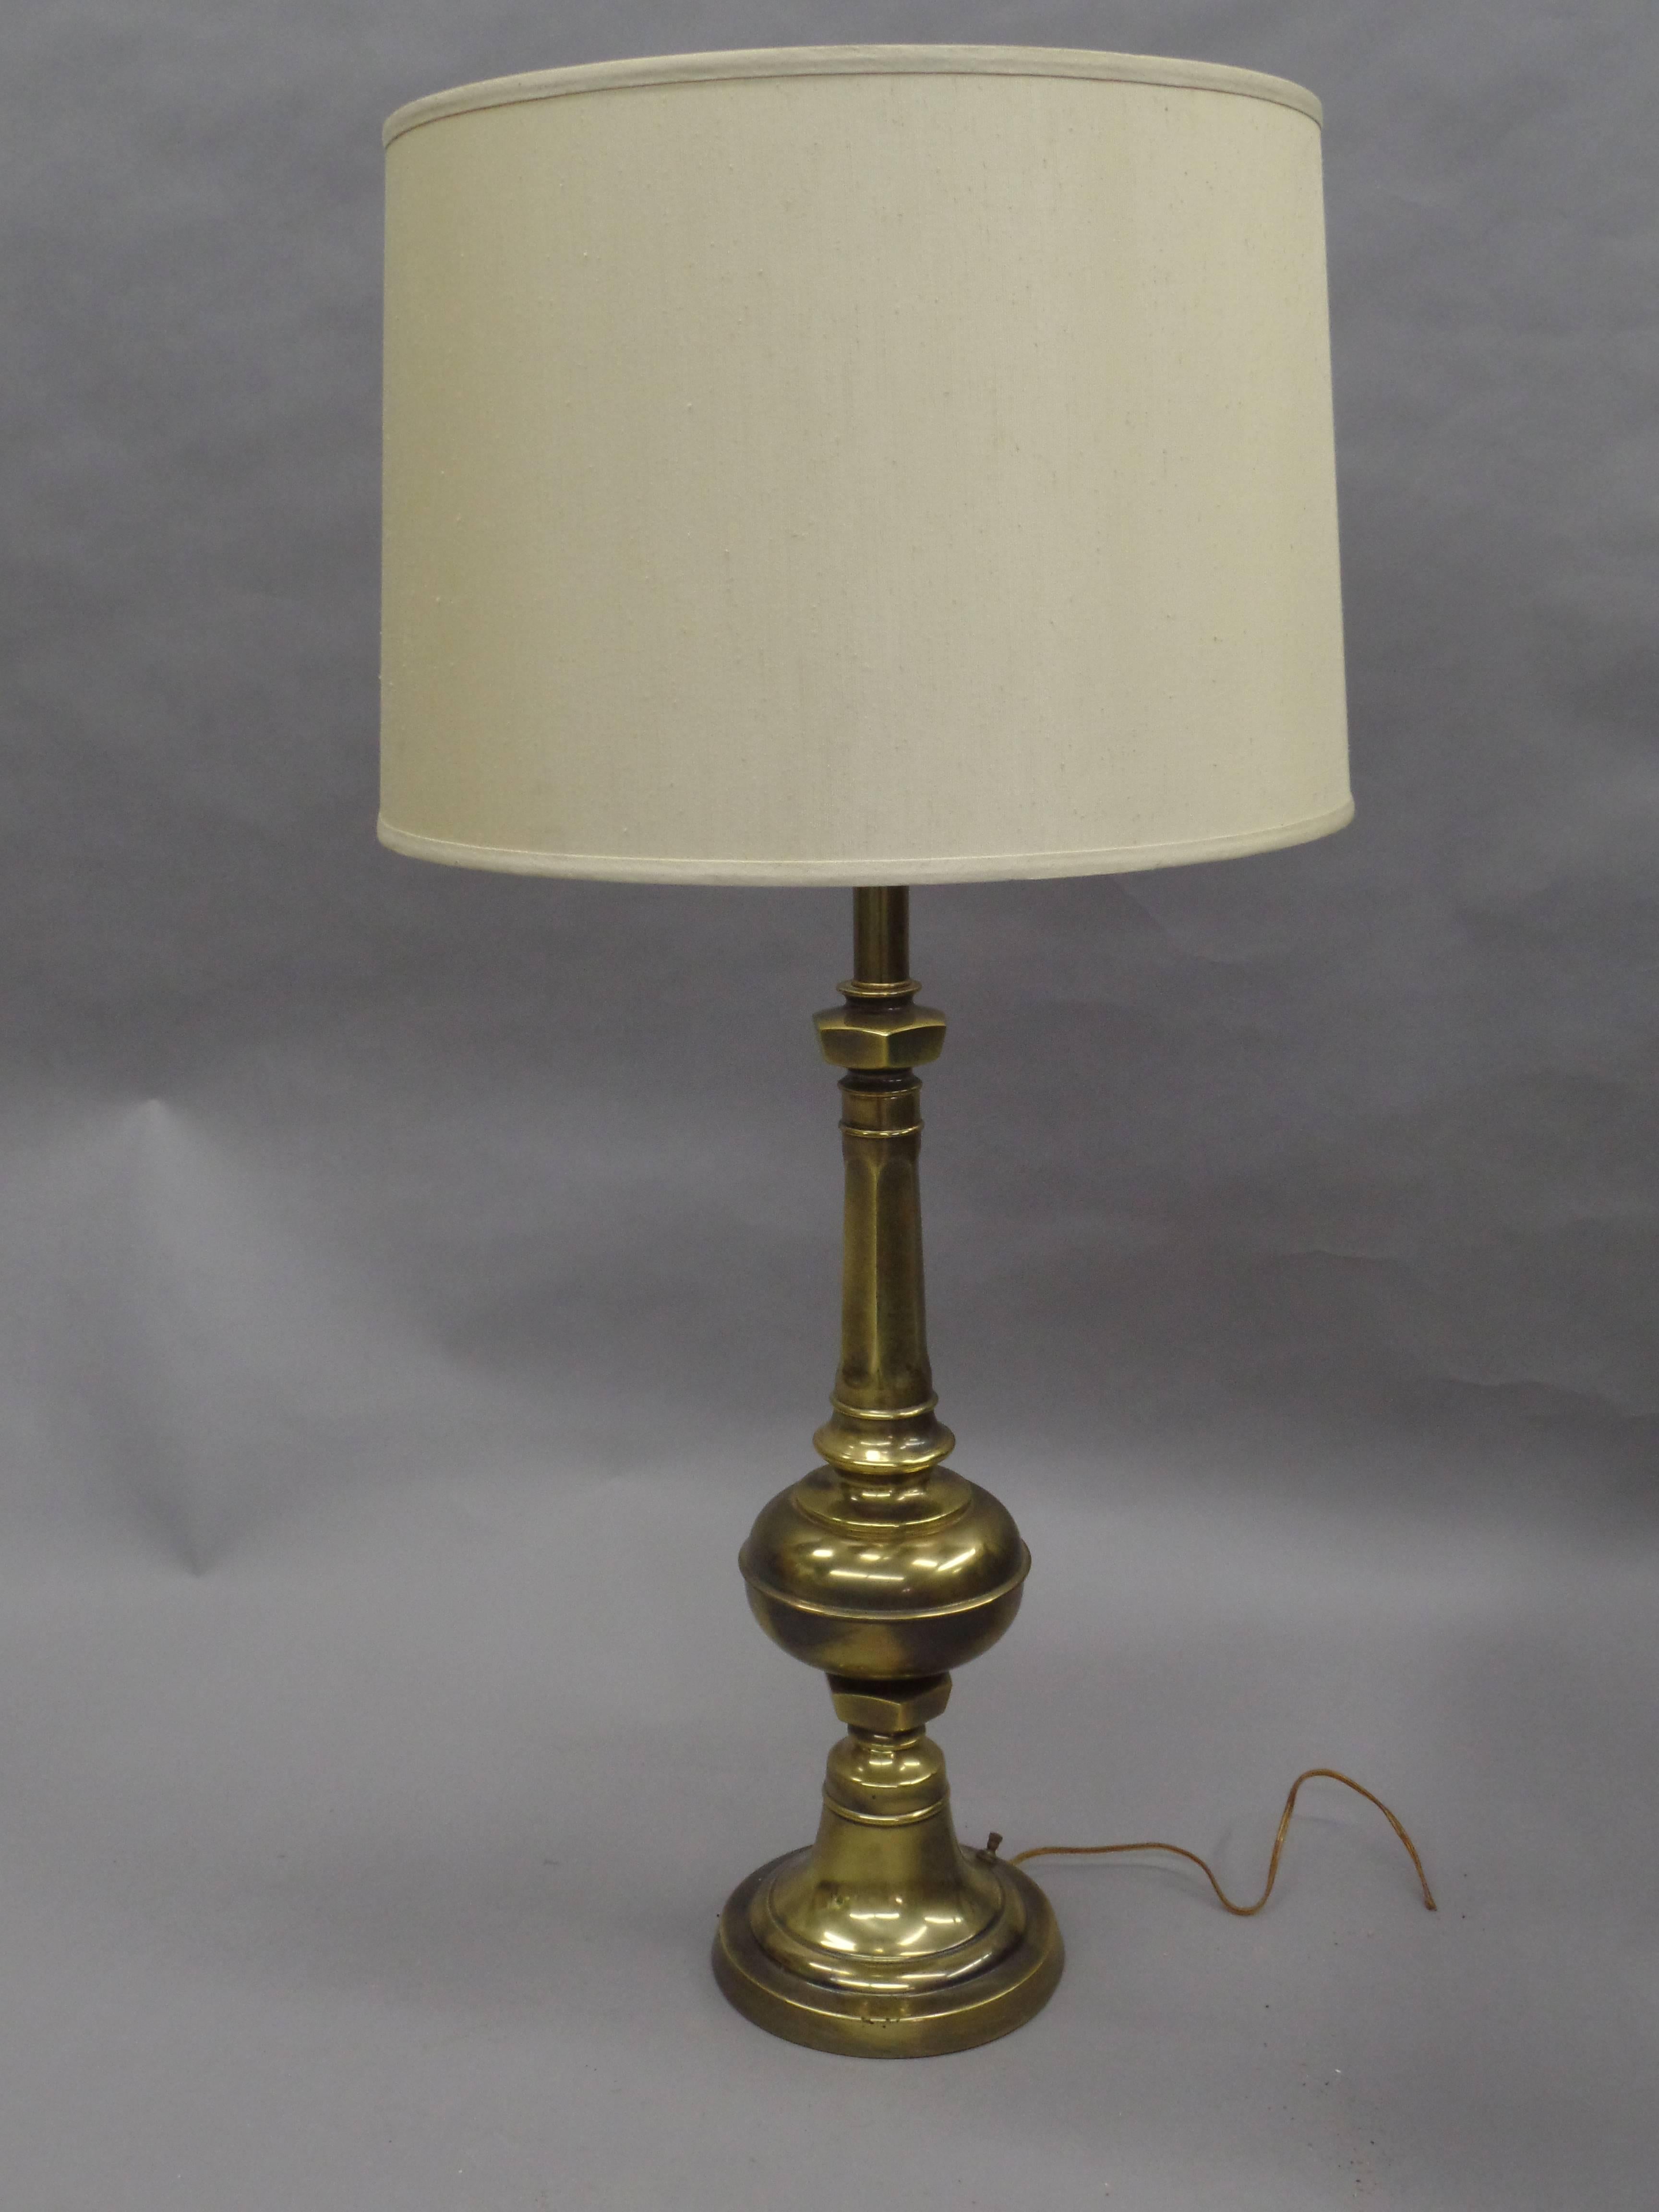 Elegant pair of solid brass English table lamps in a baluster form.

Height with shade is 38